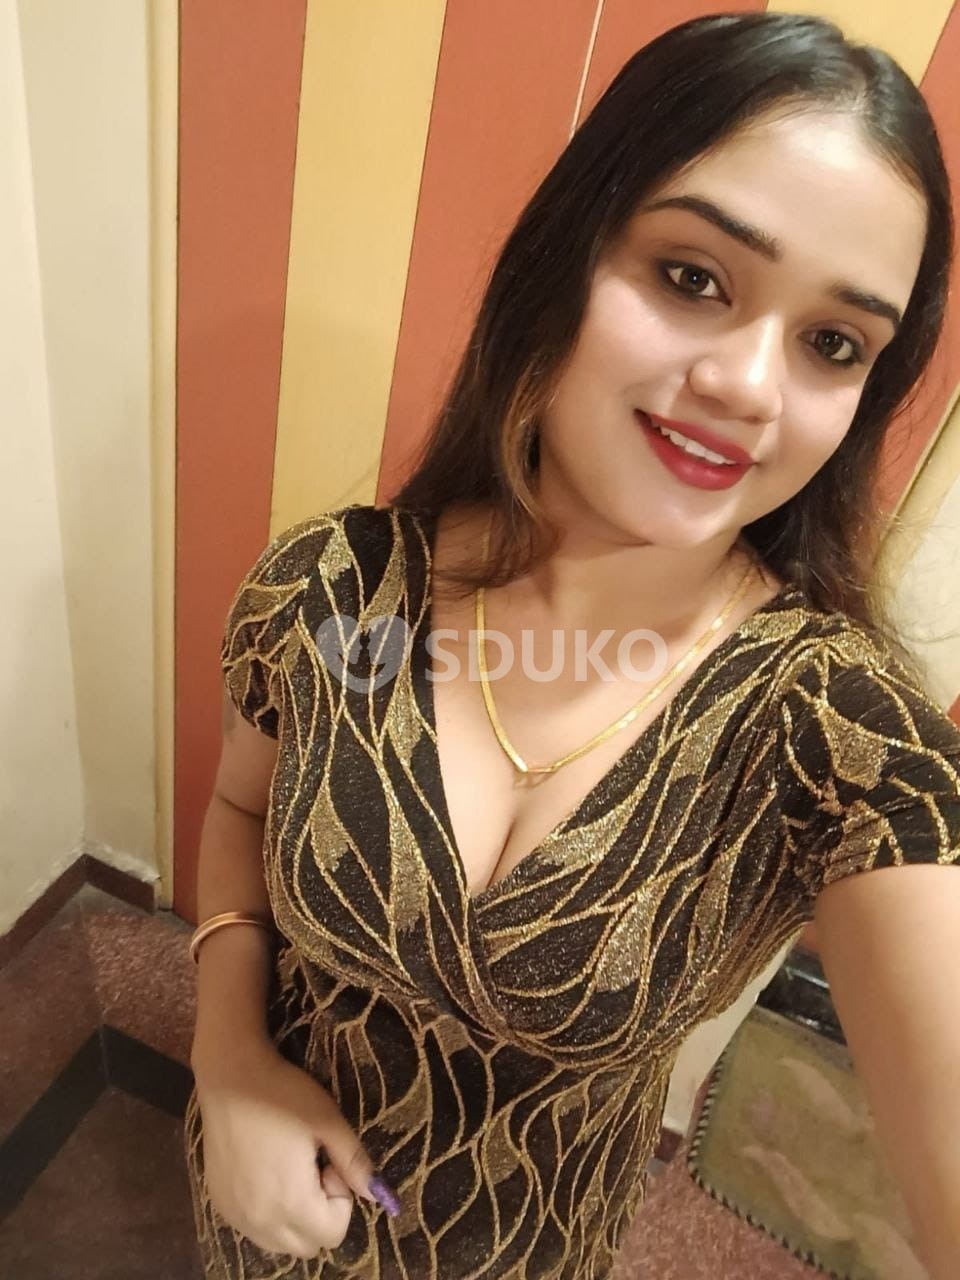 INDORE ✅ 24X7 SAFE AND SECURE HOTEL AND HOME SERVICE ANYTIME CALL ME FULL SAFE AND SECURE GENUINE CALL GIRL